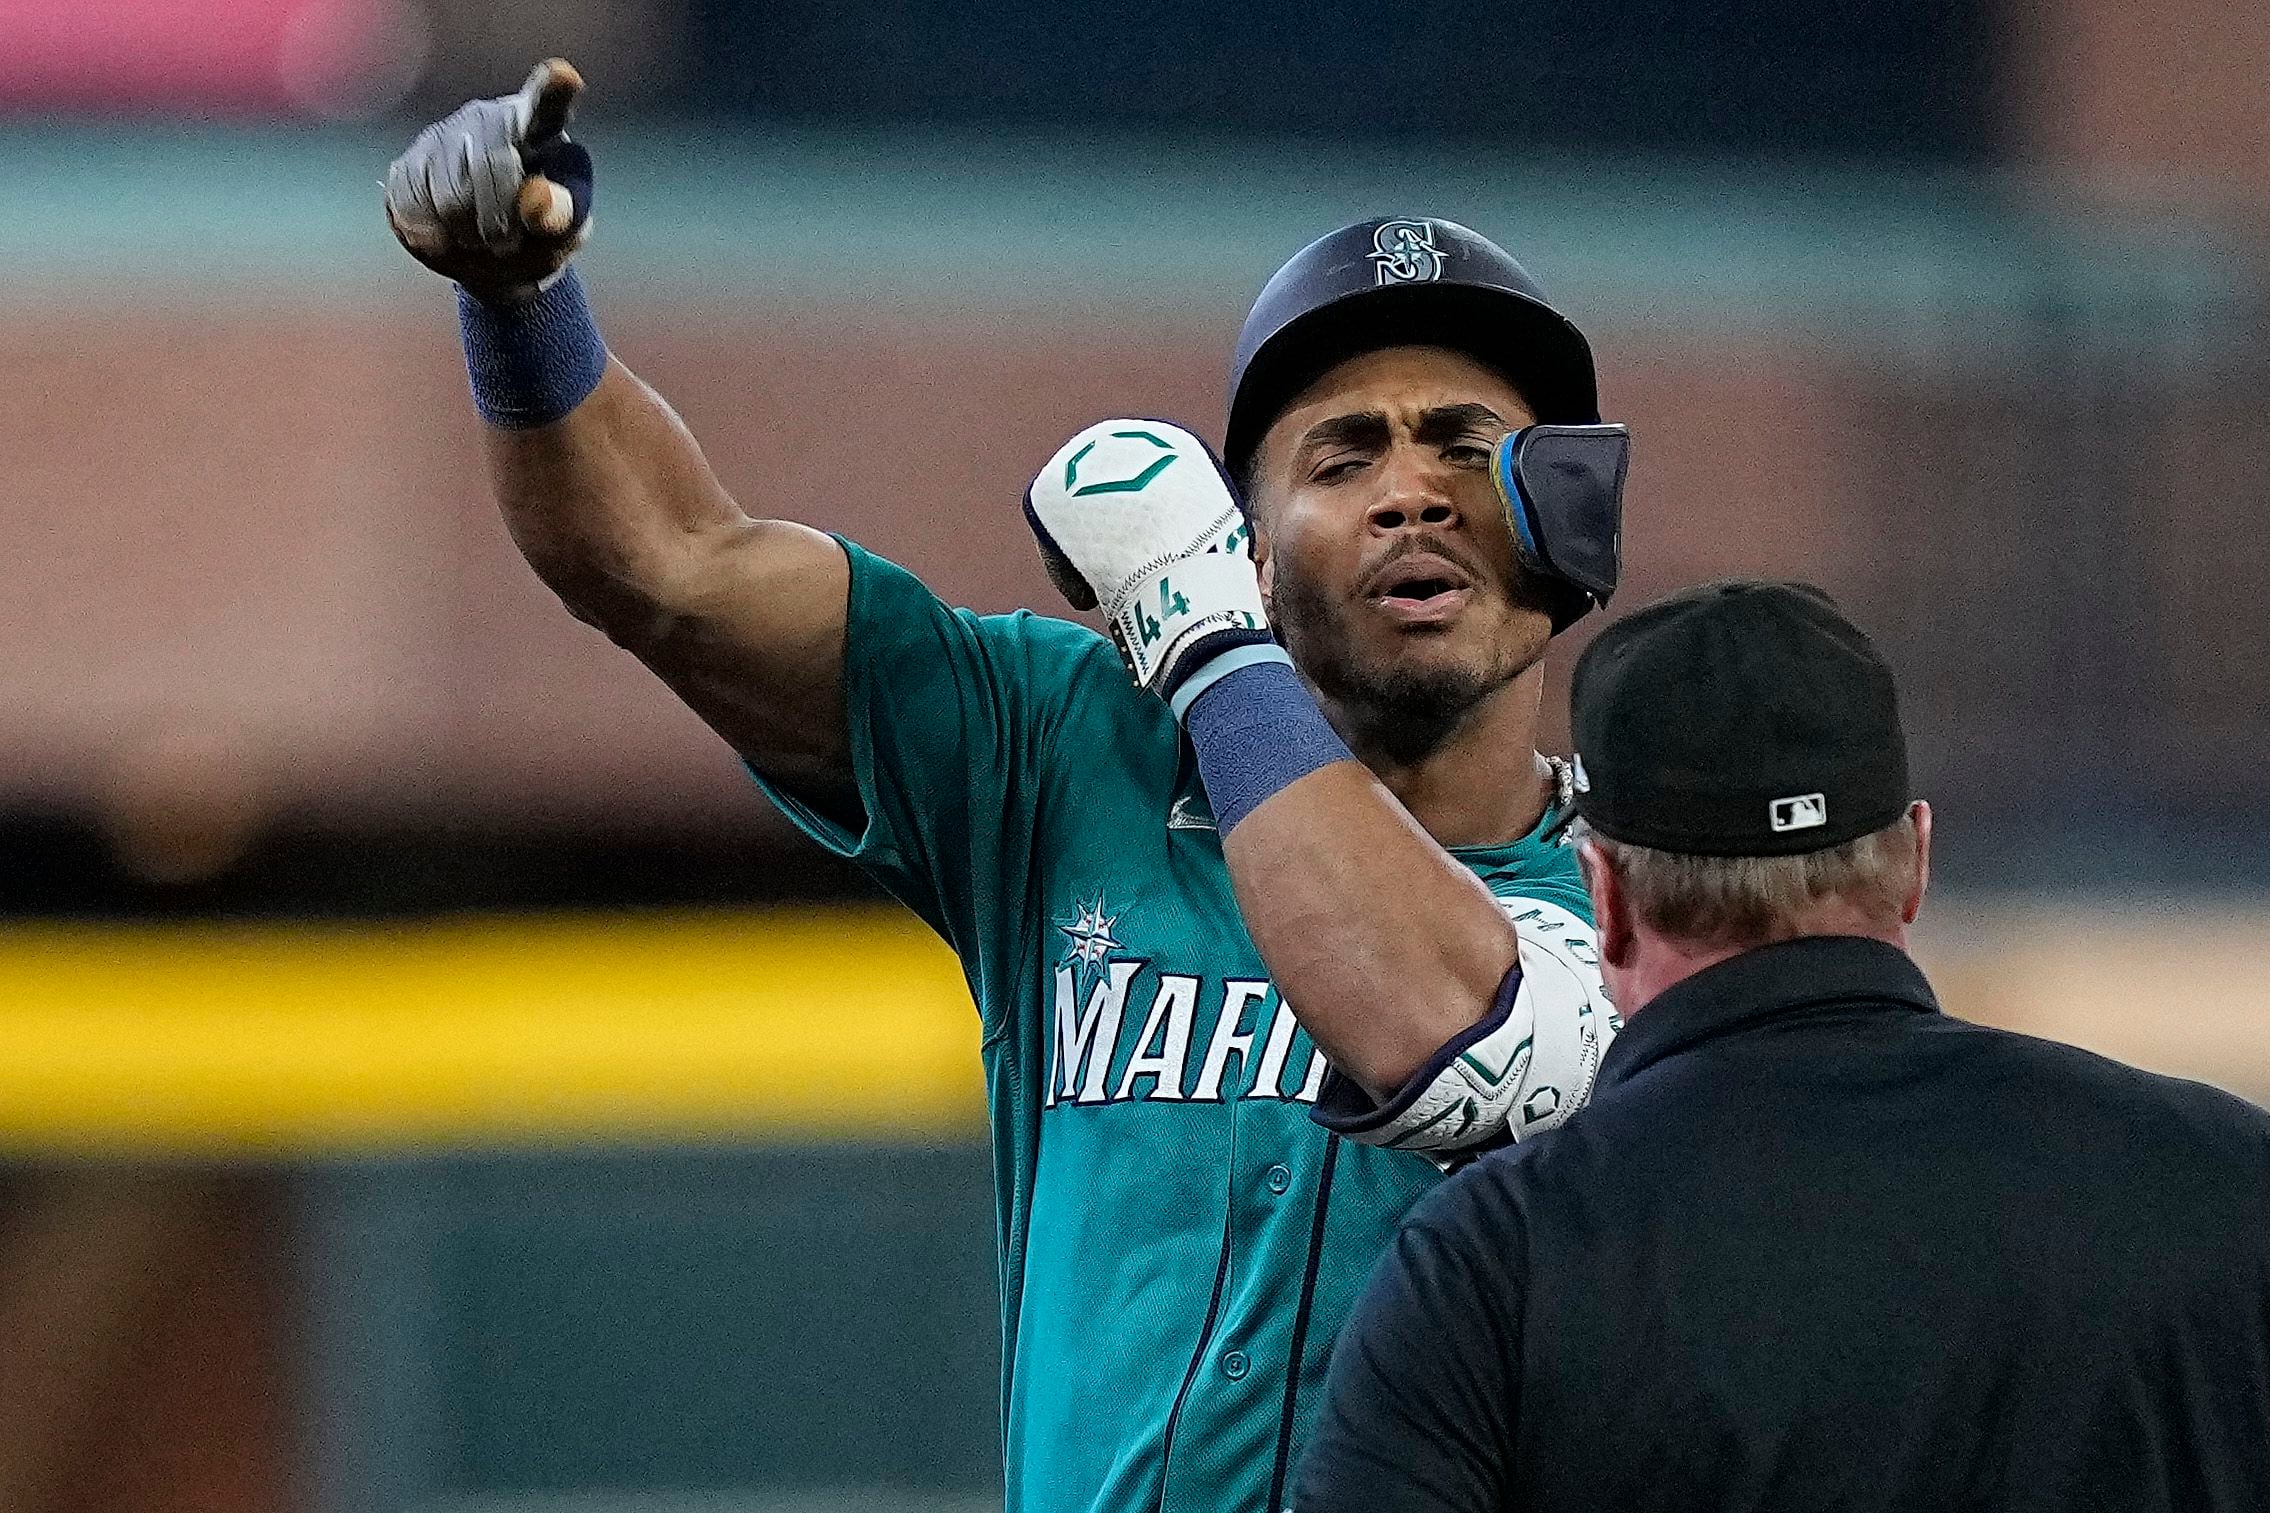 Rodriguez's 17-hit deluge helps put the plucky Mariners back in